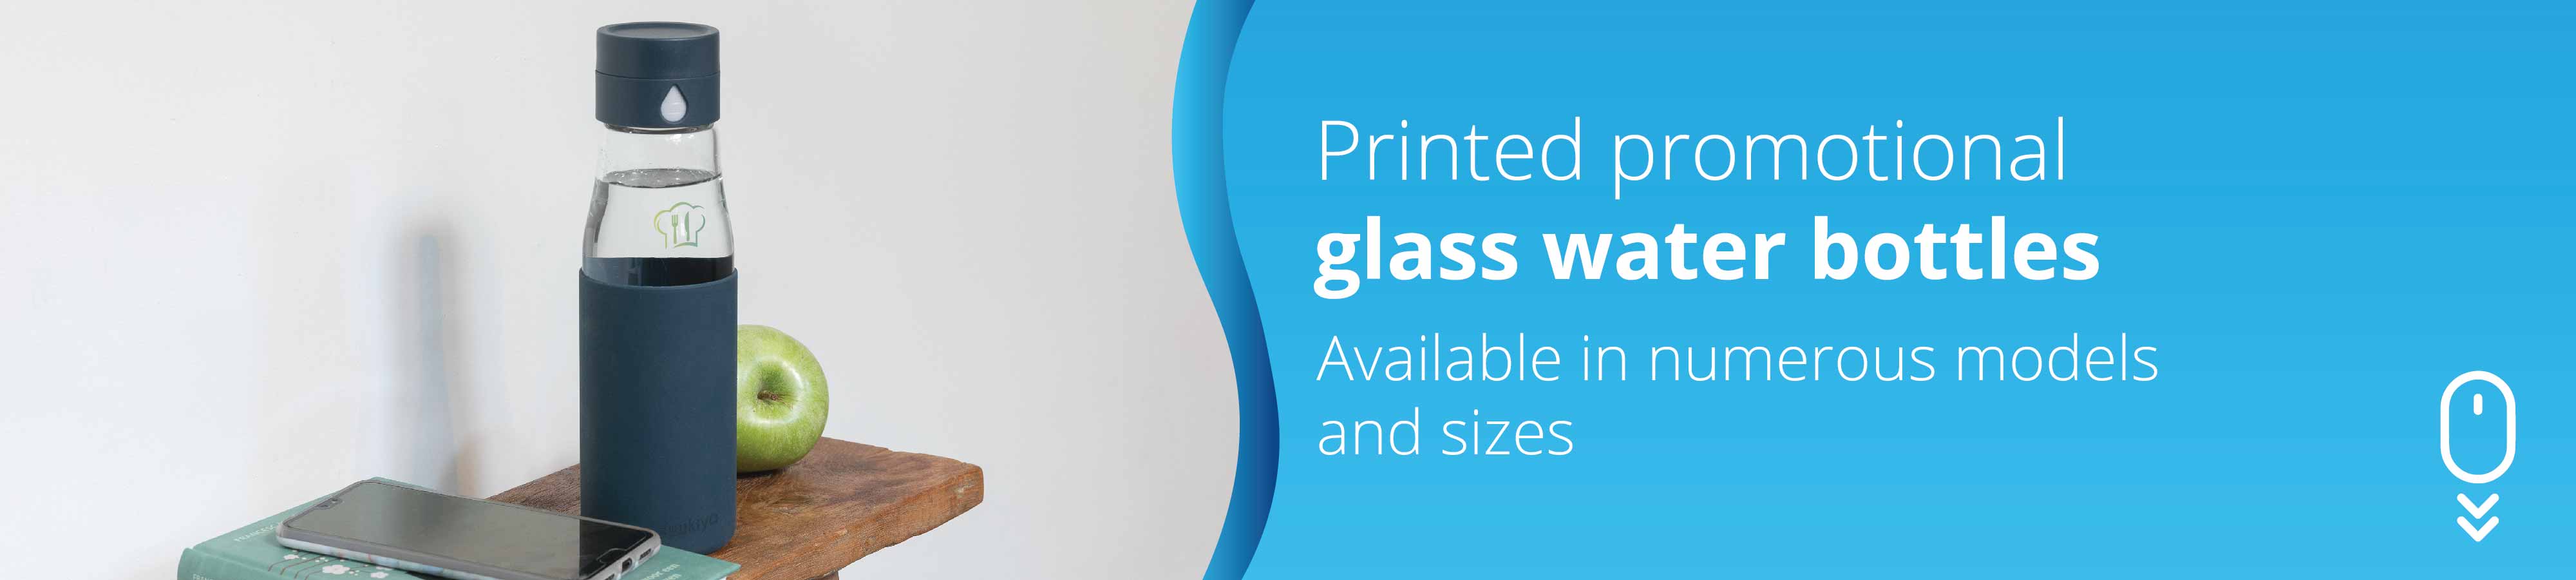 printed-promotional-glass-water-bottles